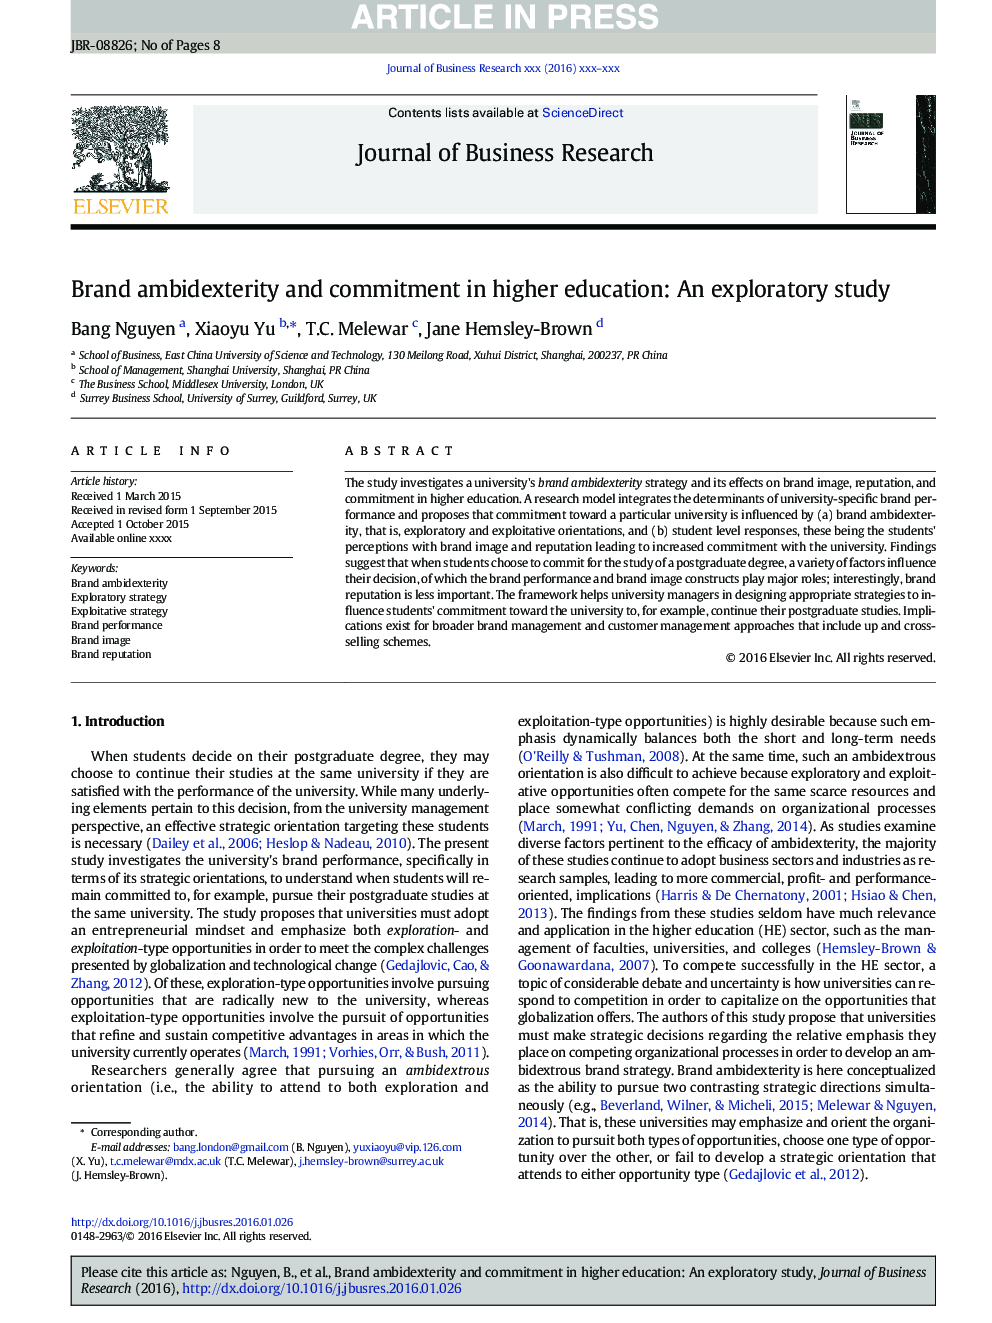 Brand ambidexterity and commitment in higher education: An exploratory study